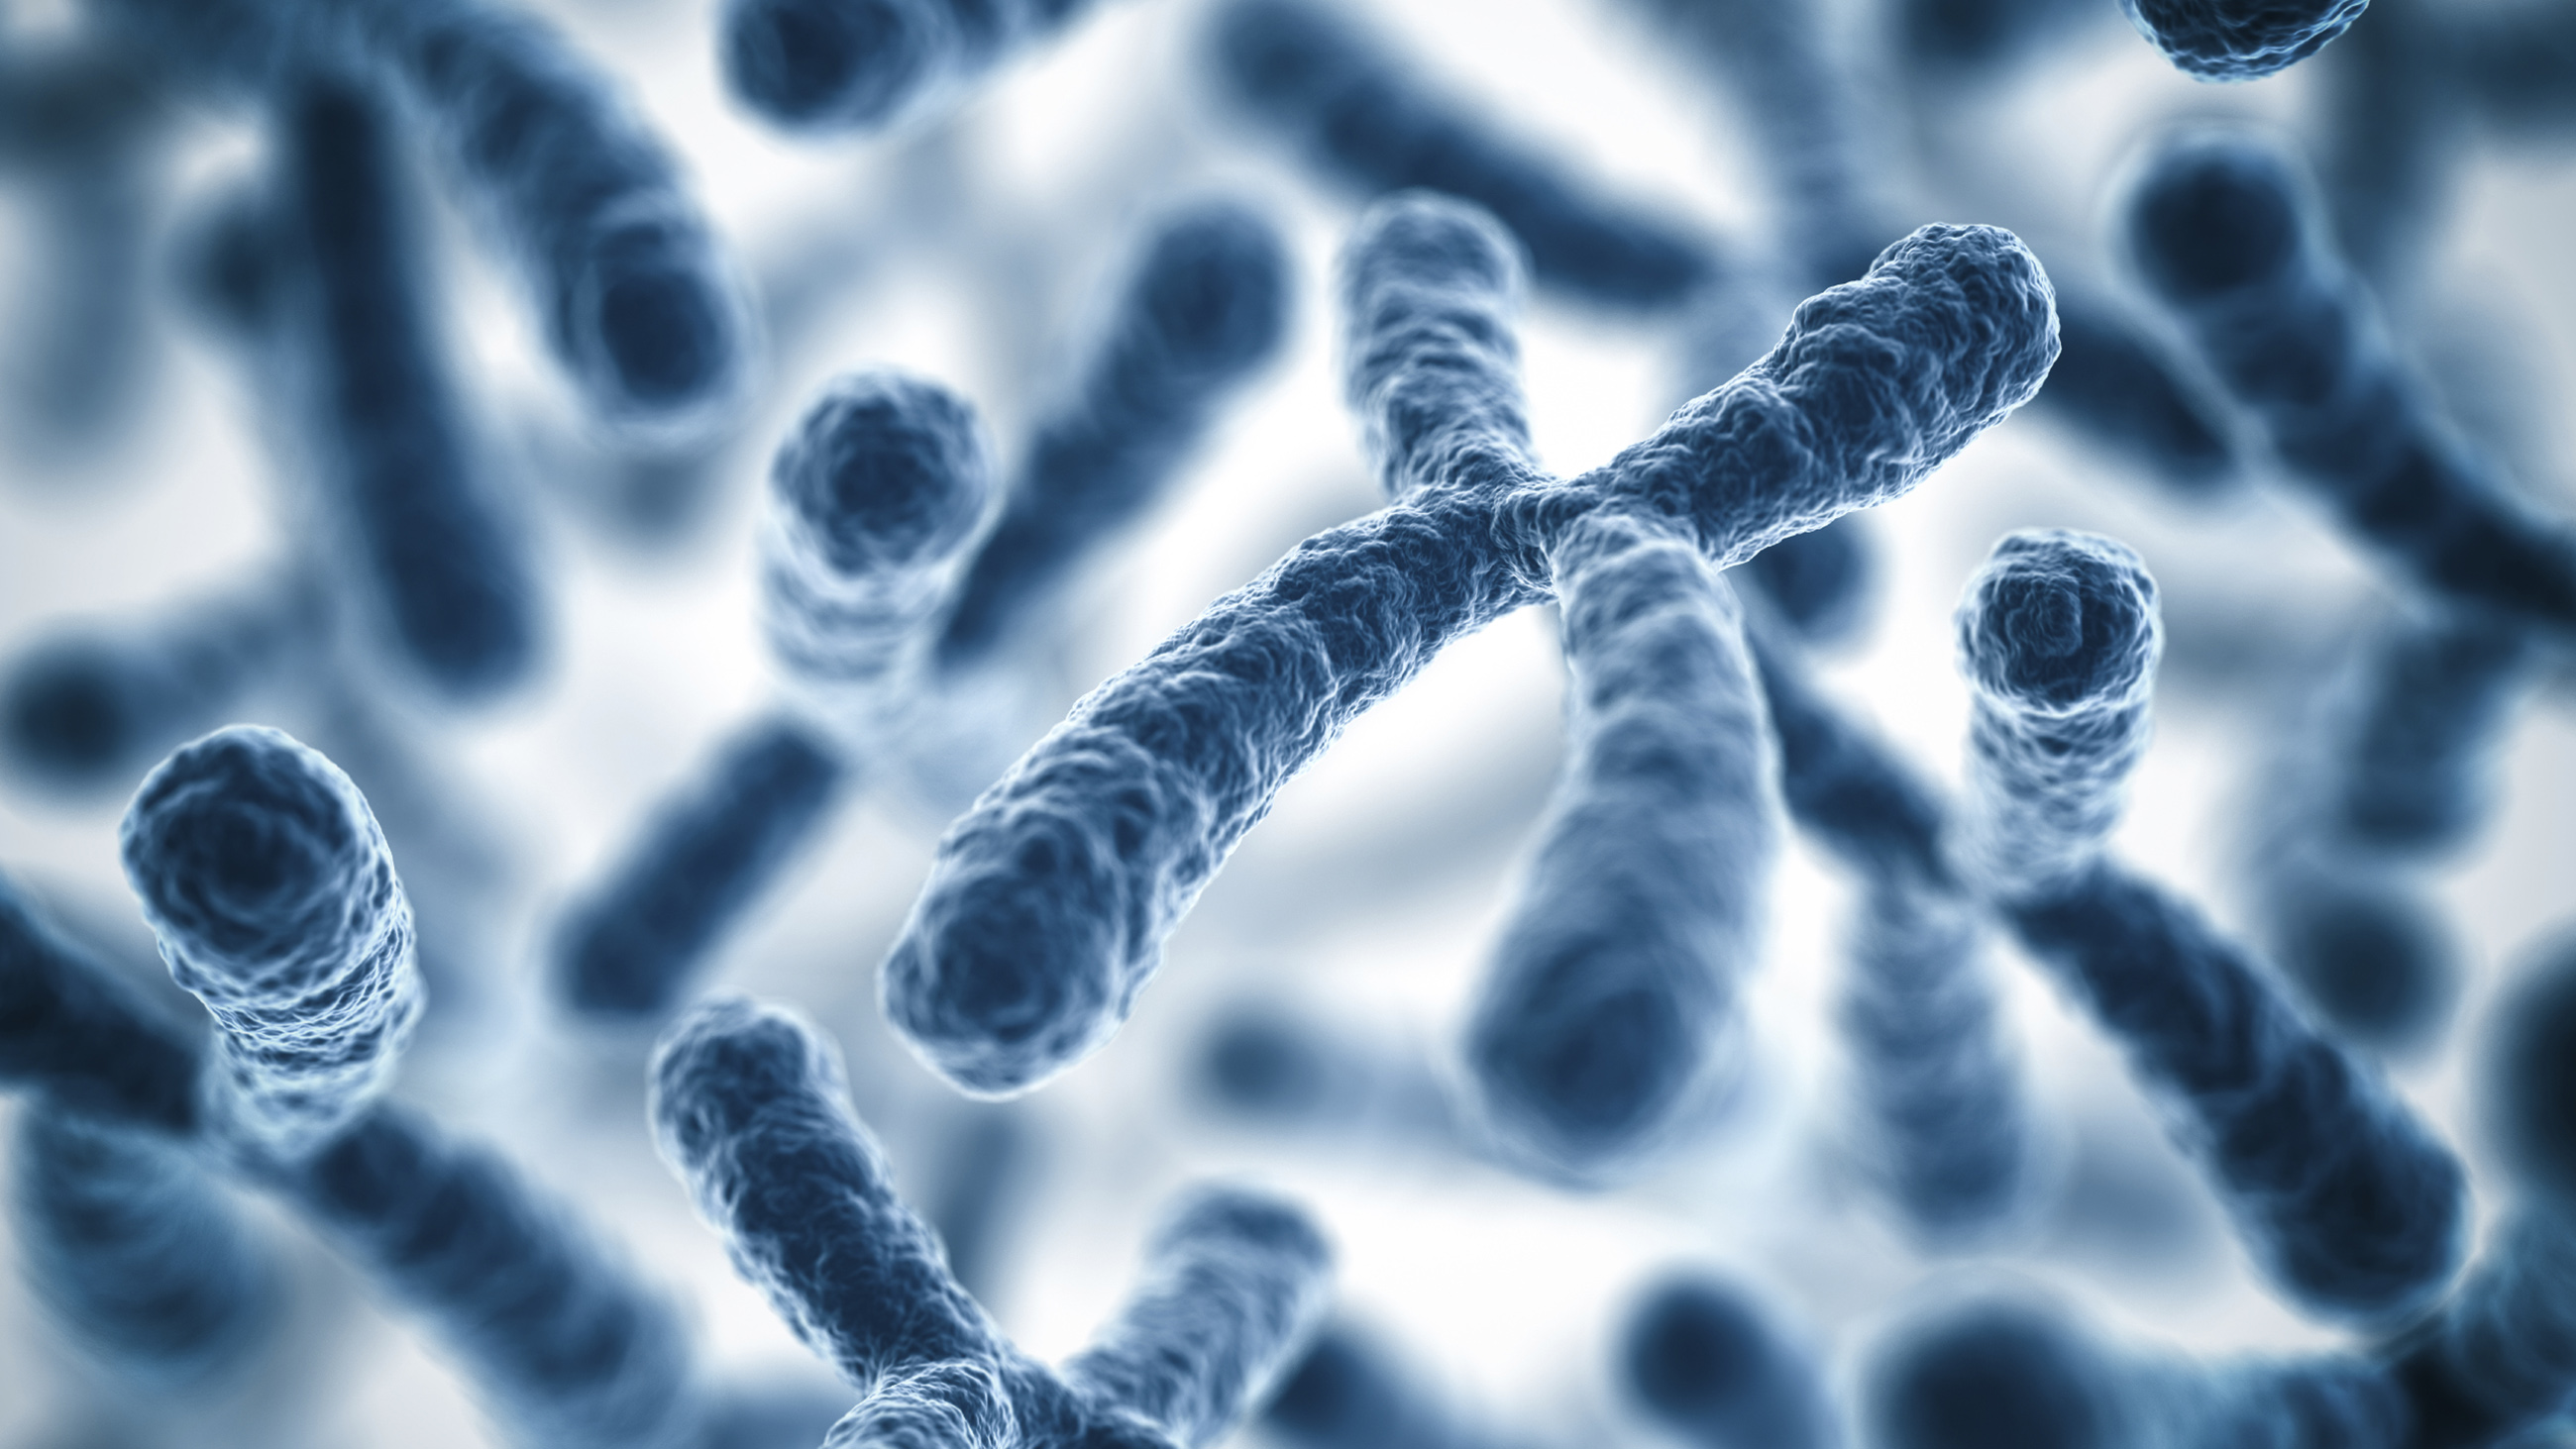 Nobel Laureate Carol Greider published a "preprint" of her results on regulating telomere length on the site bioRxiv in February. (Visual by iStock.com)